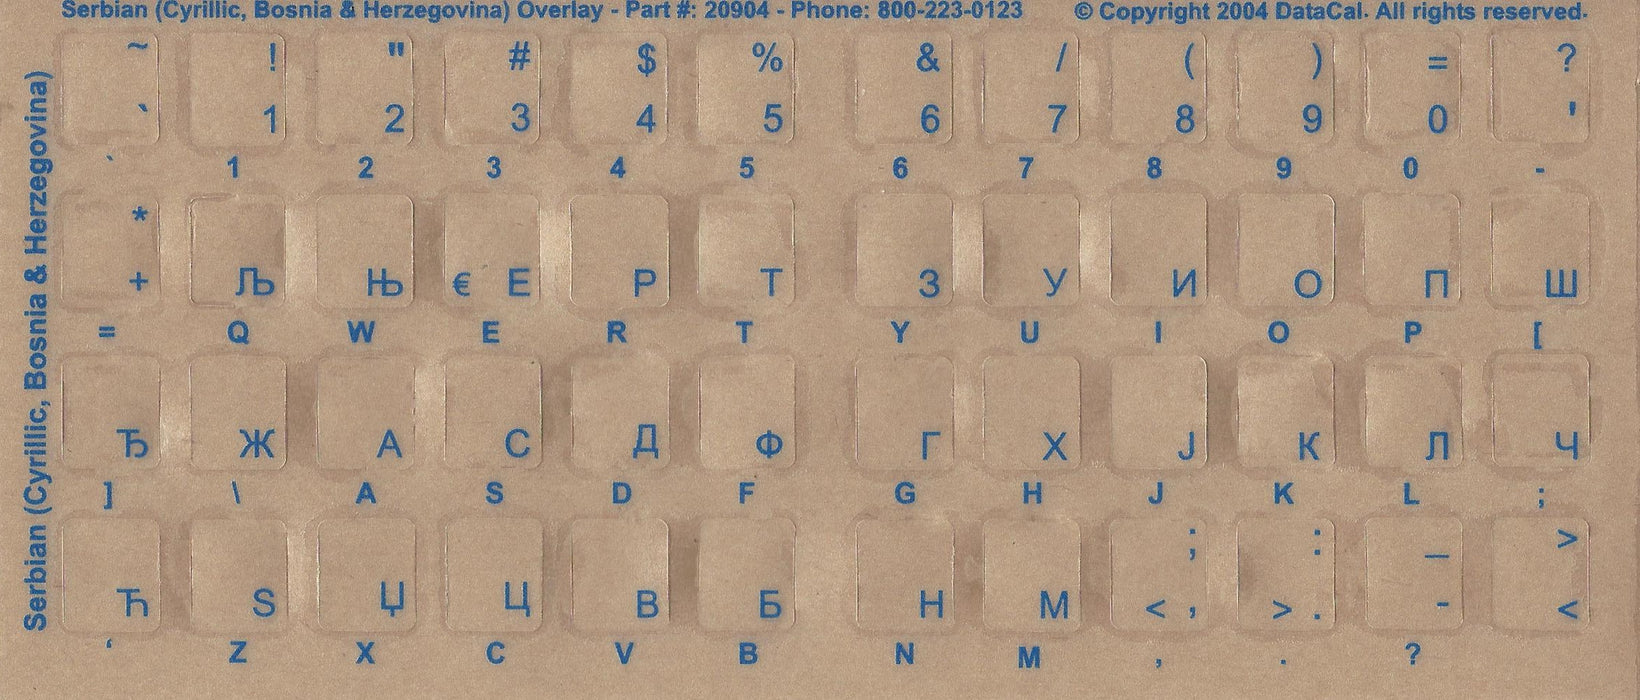 Serbian Keyboard Stickers - Labels - Overlays with Blue Characters for White Computer Keyboard